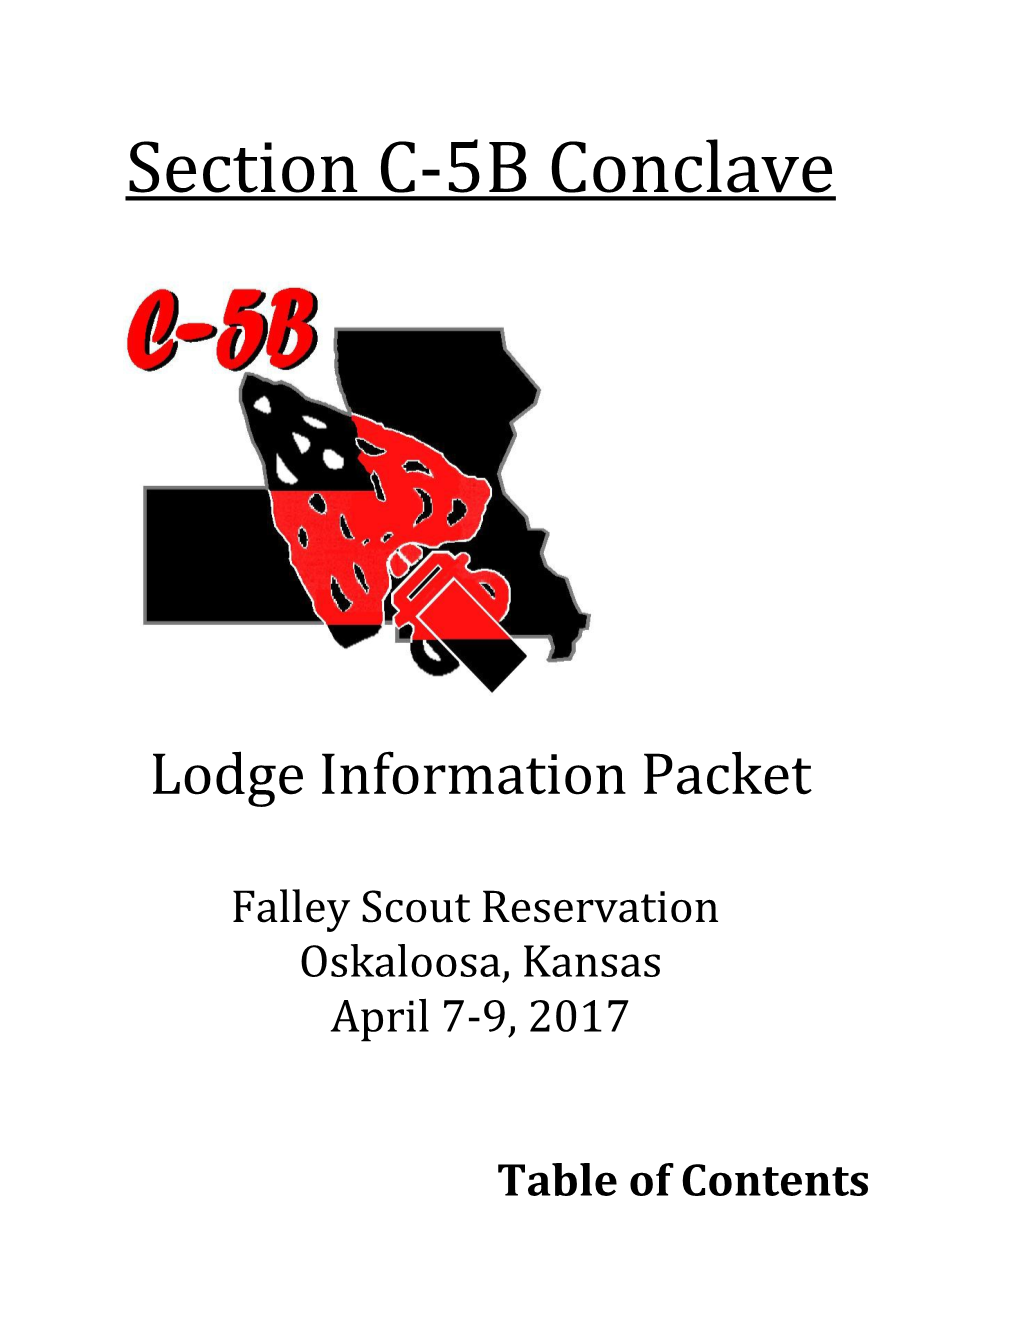 Lodge Information Packet